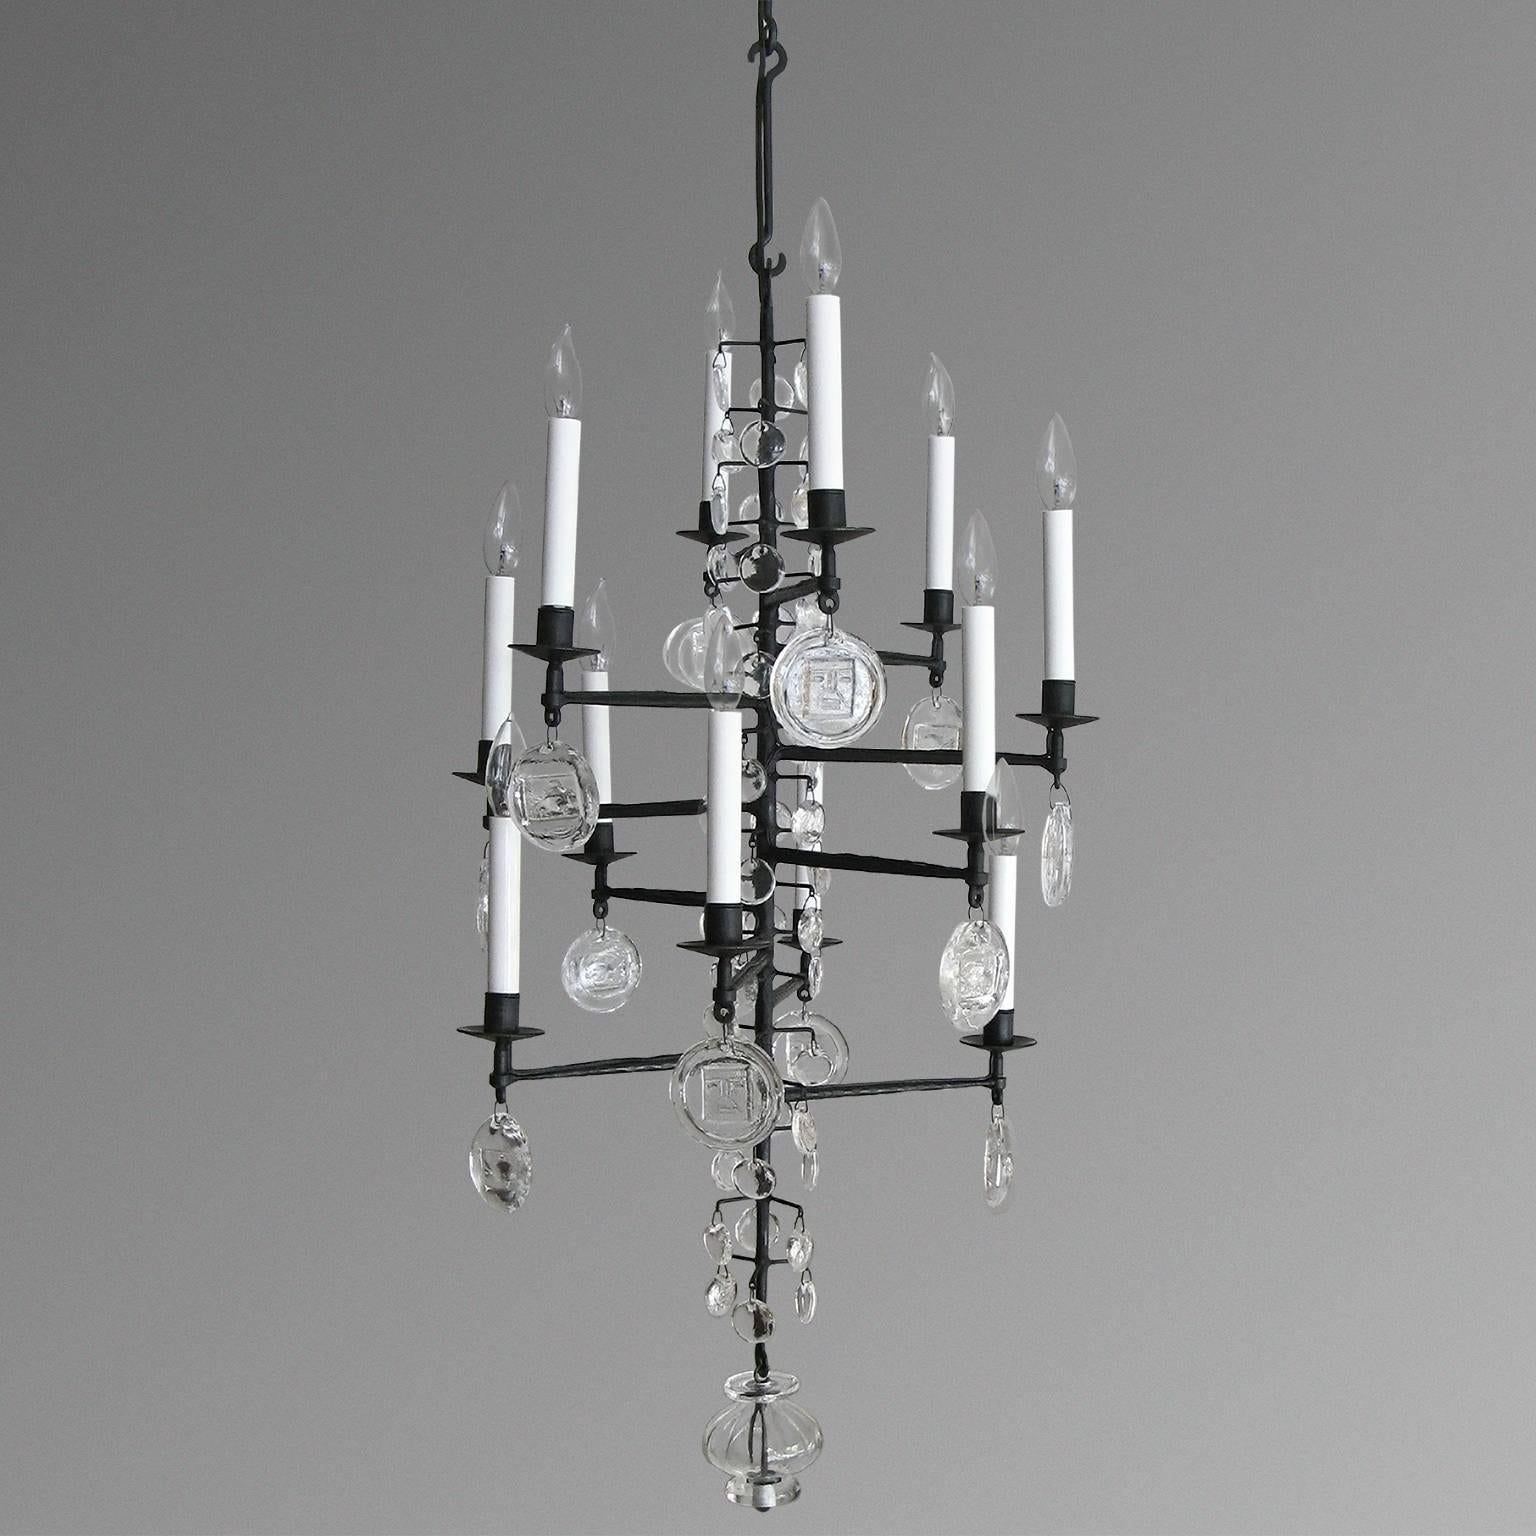 Scandinavian Modern wrought iron chandelier with clear crystals, newly electrified 12 candelabra base lights. Made by Boda Nova Glassworks/Axel Stromberg Ironwork, Sweden. Measures: H: 39